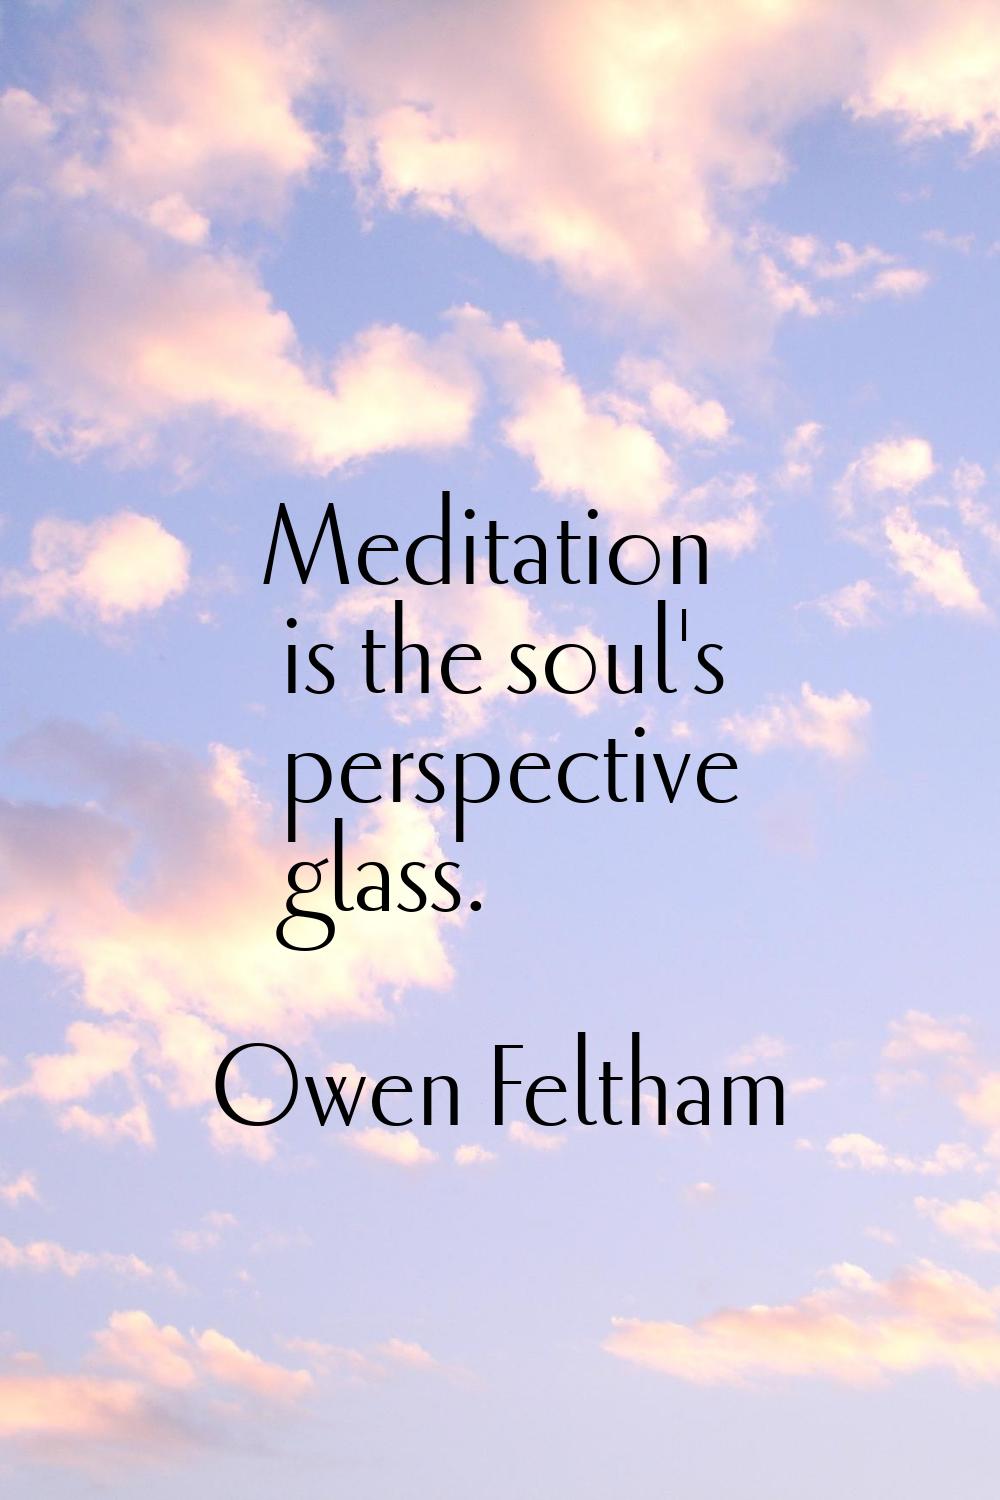 Meditation is the soul's perspective glass.